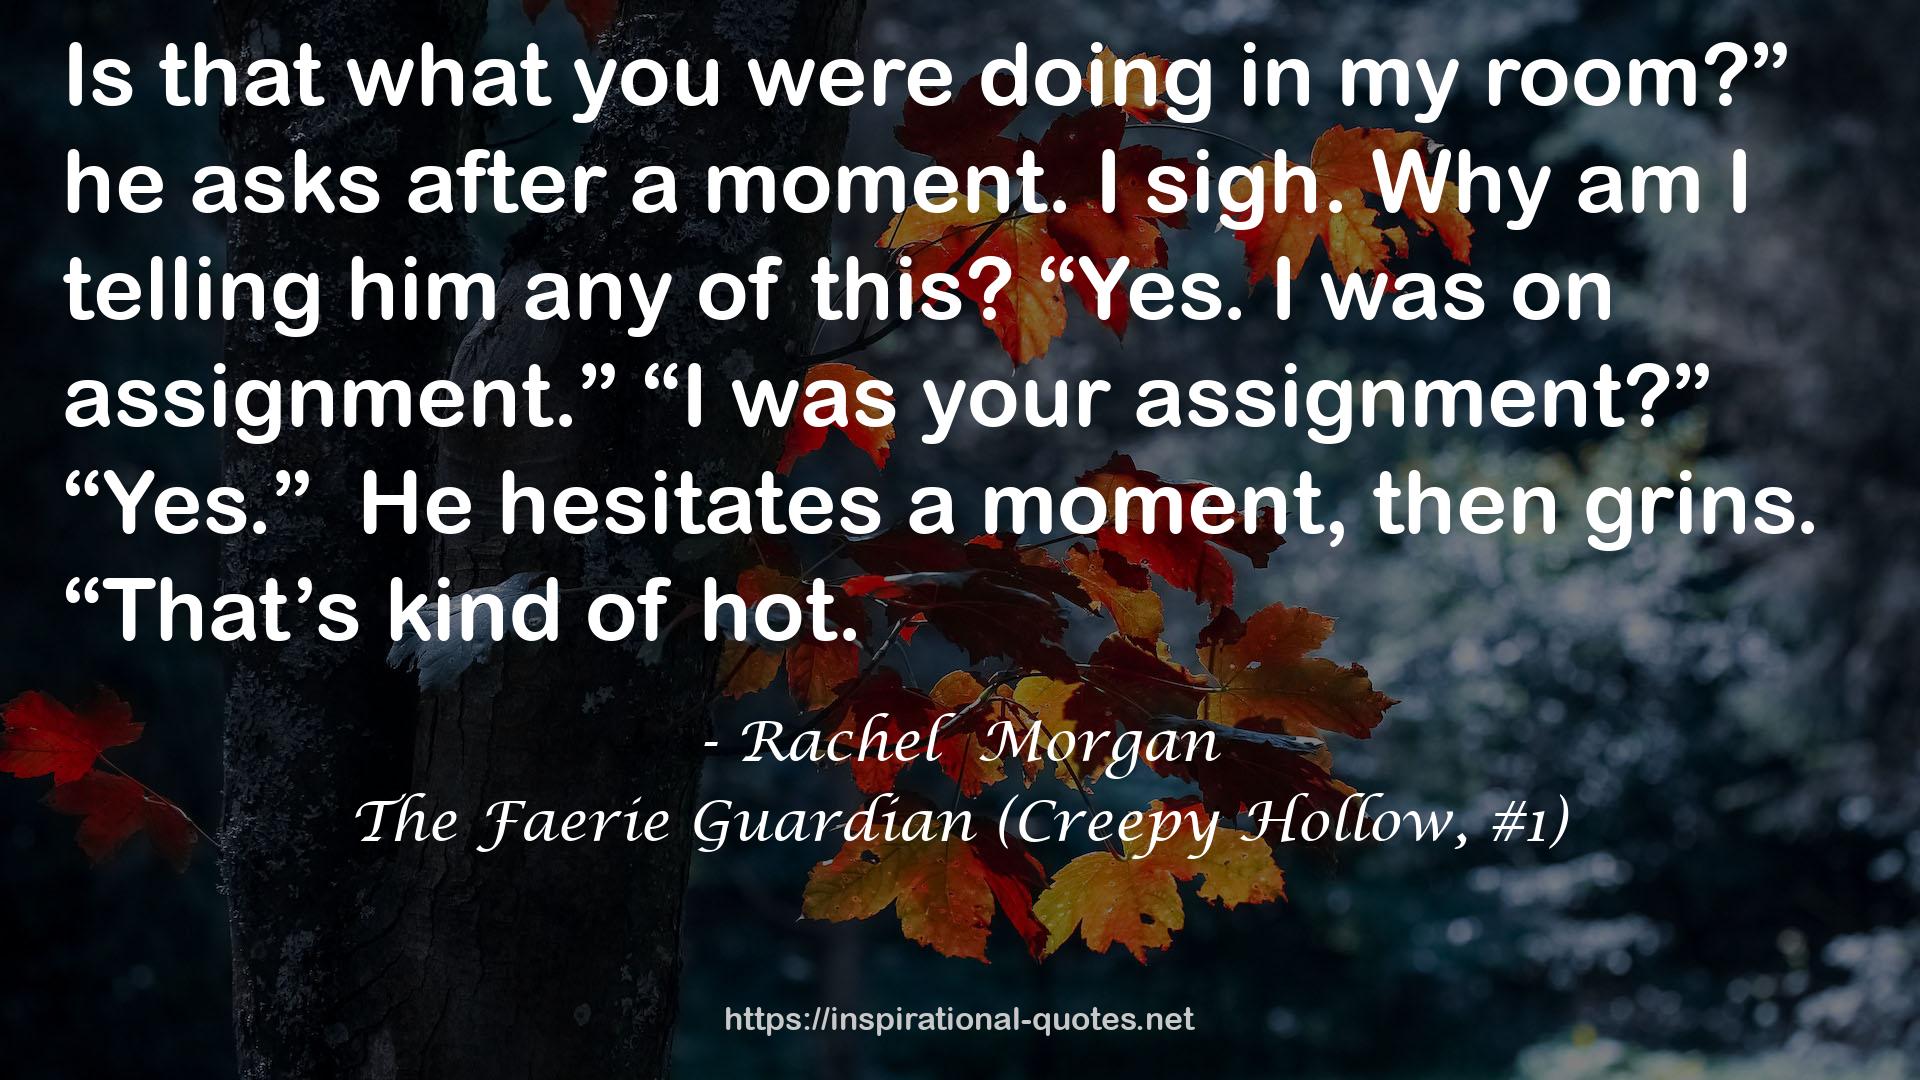 The Faerie Guardian (Creepy Hollow, #1) QUOTES